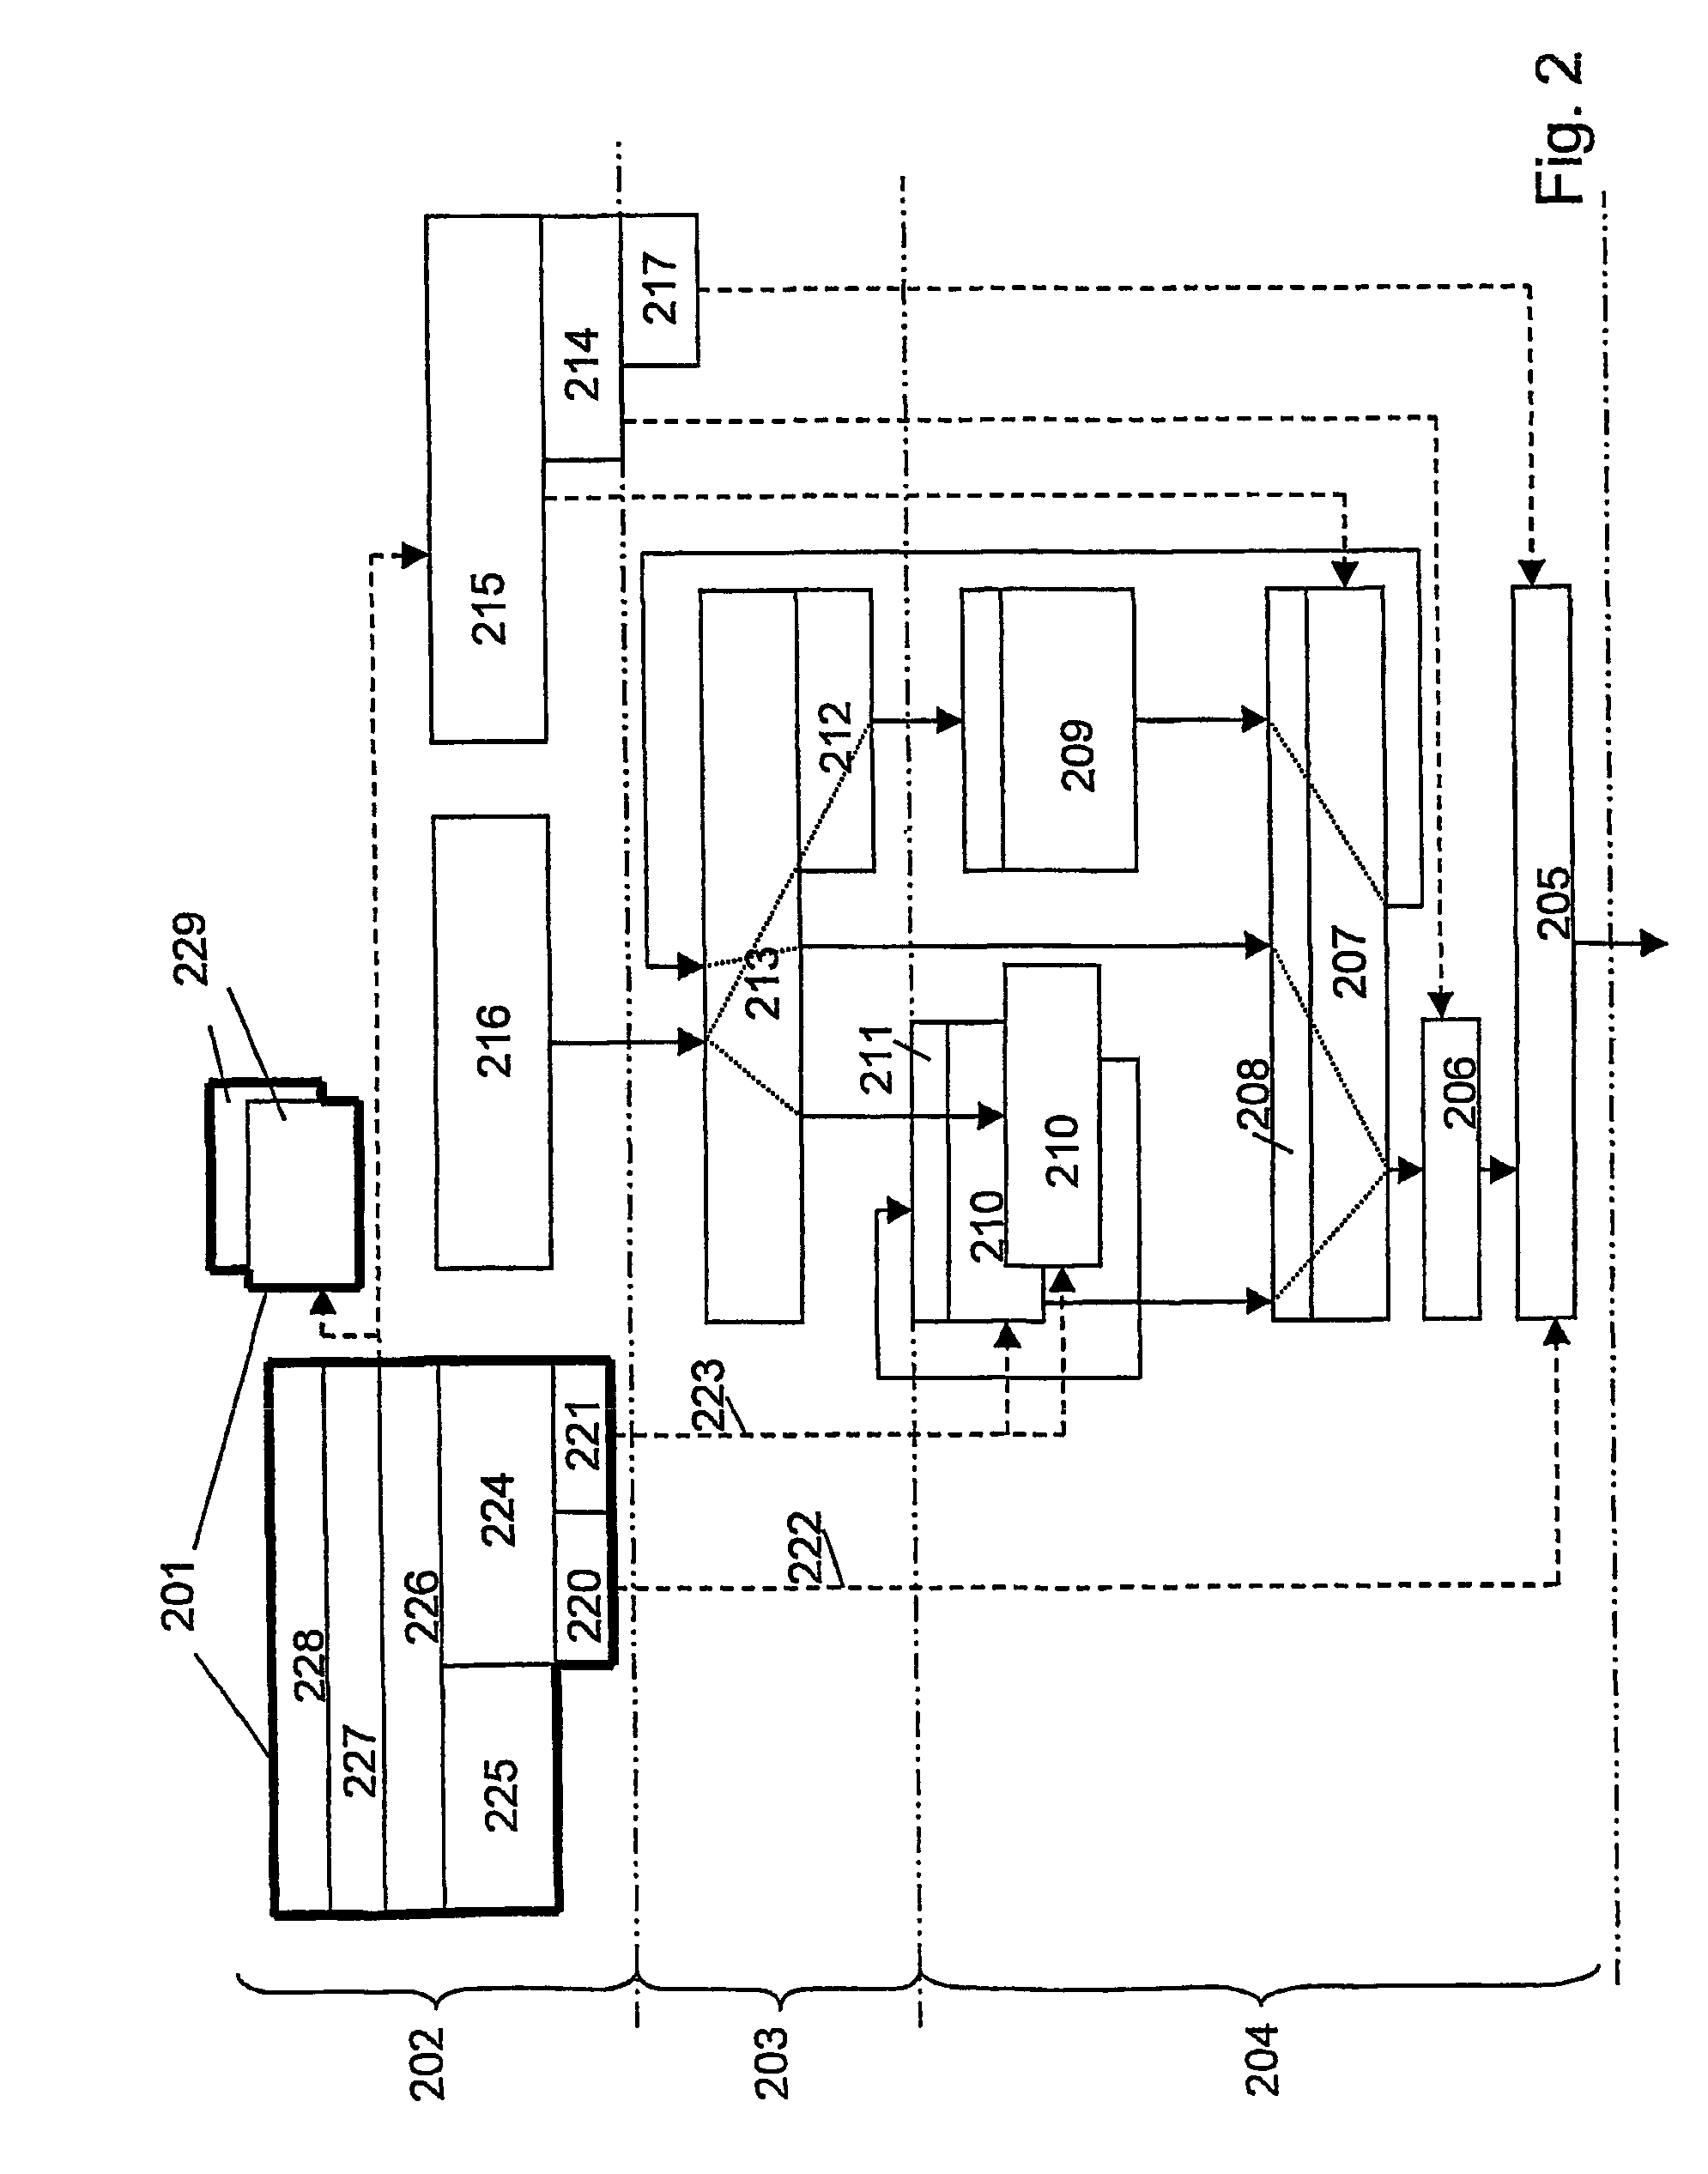 Method and arrangement to secure access to a communications network